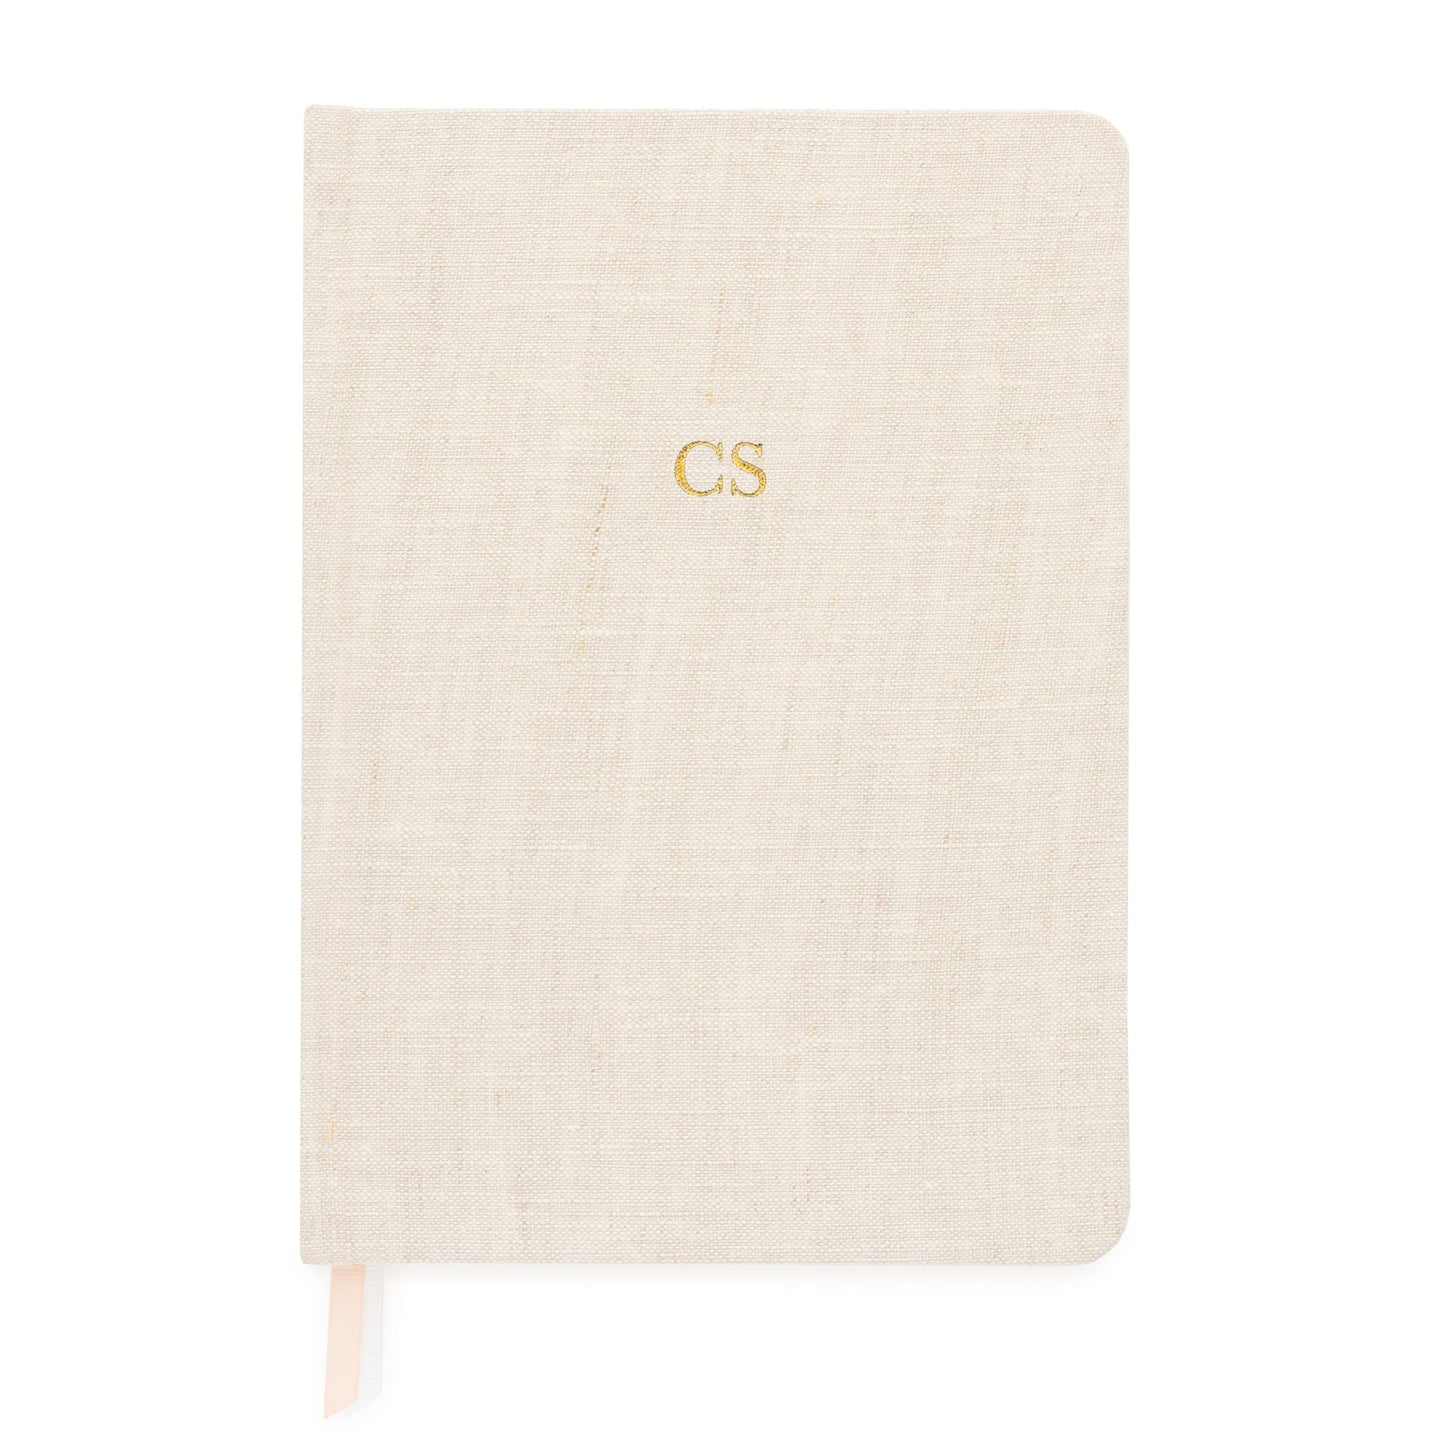 flax journal with gold foil monogram